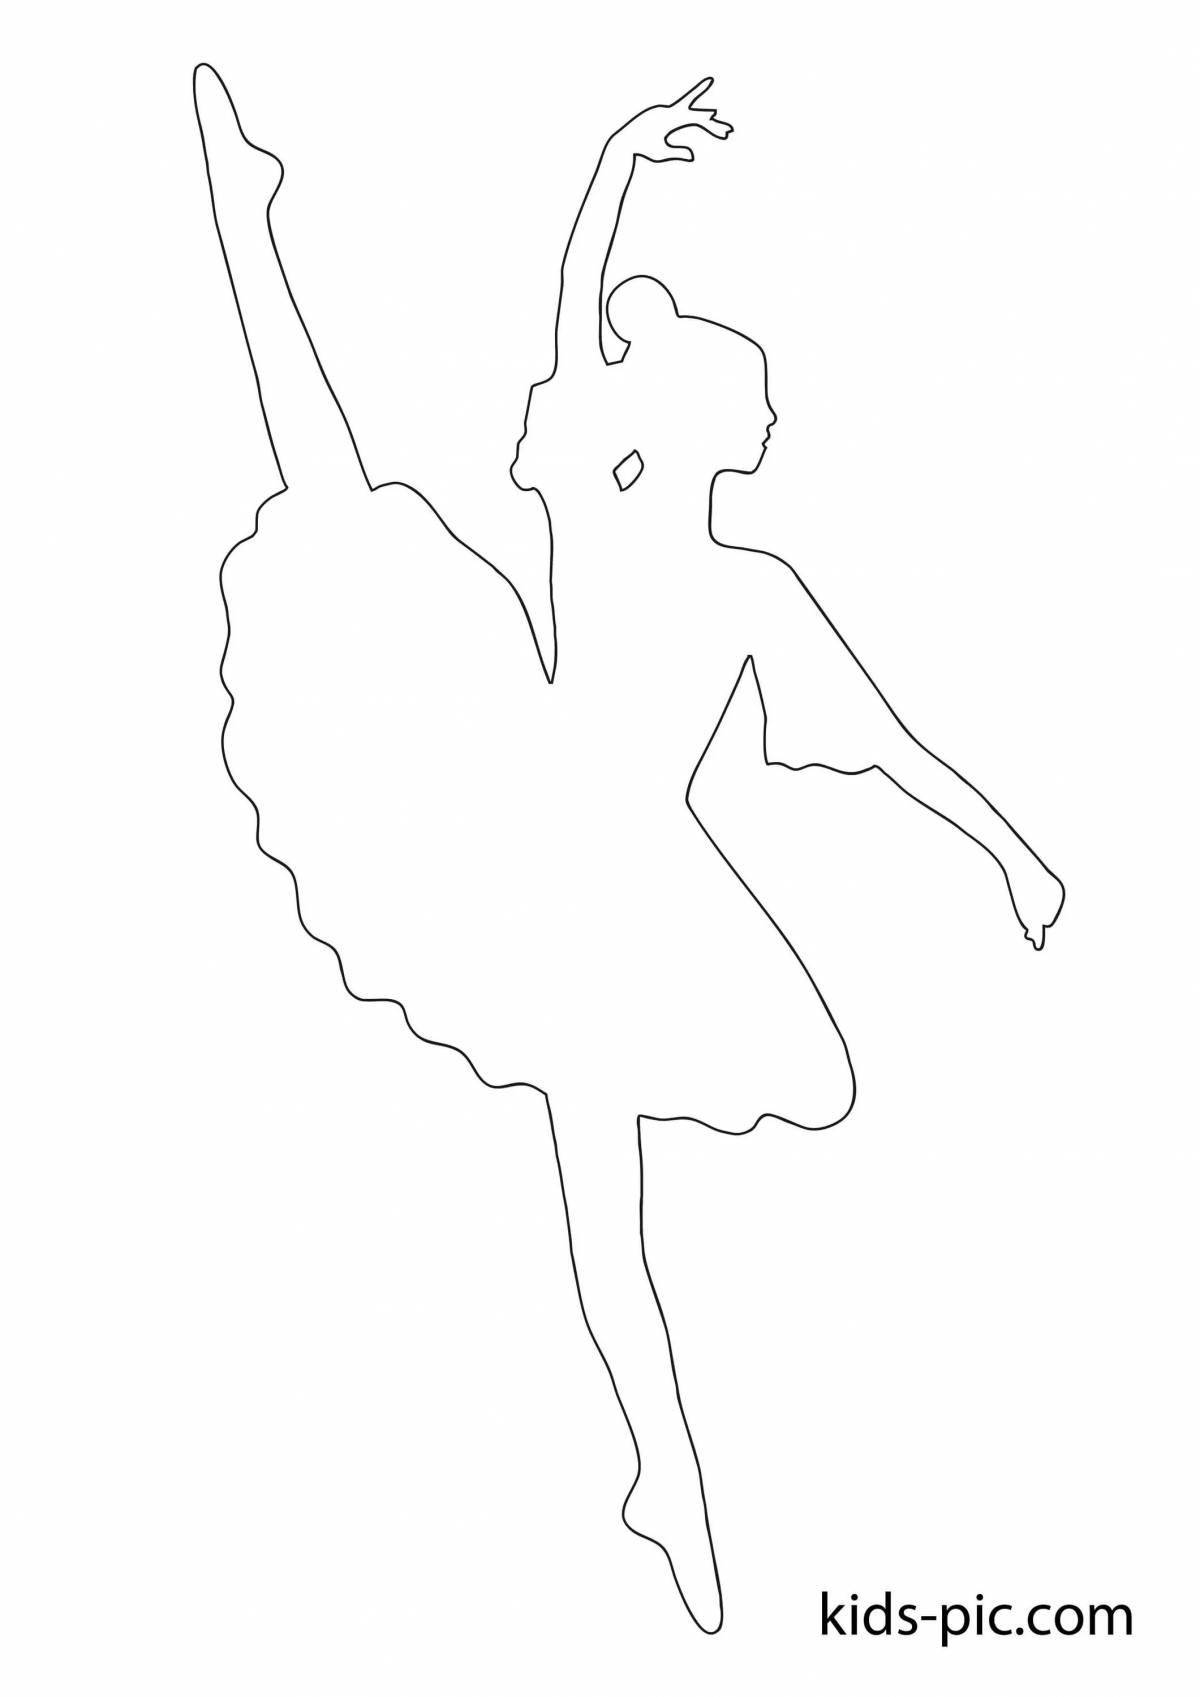 Coloring page elegant silhouette of a ballerina